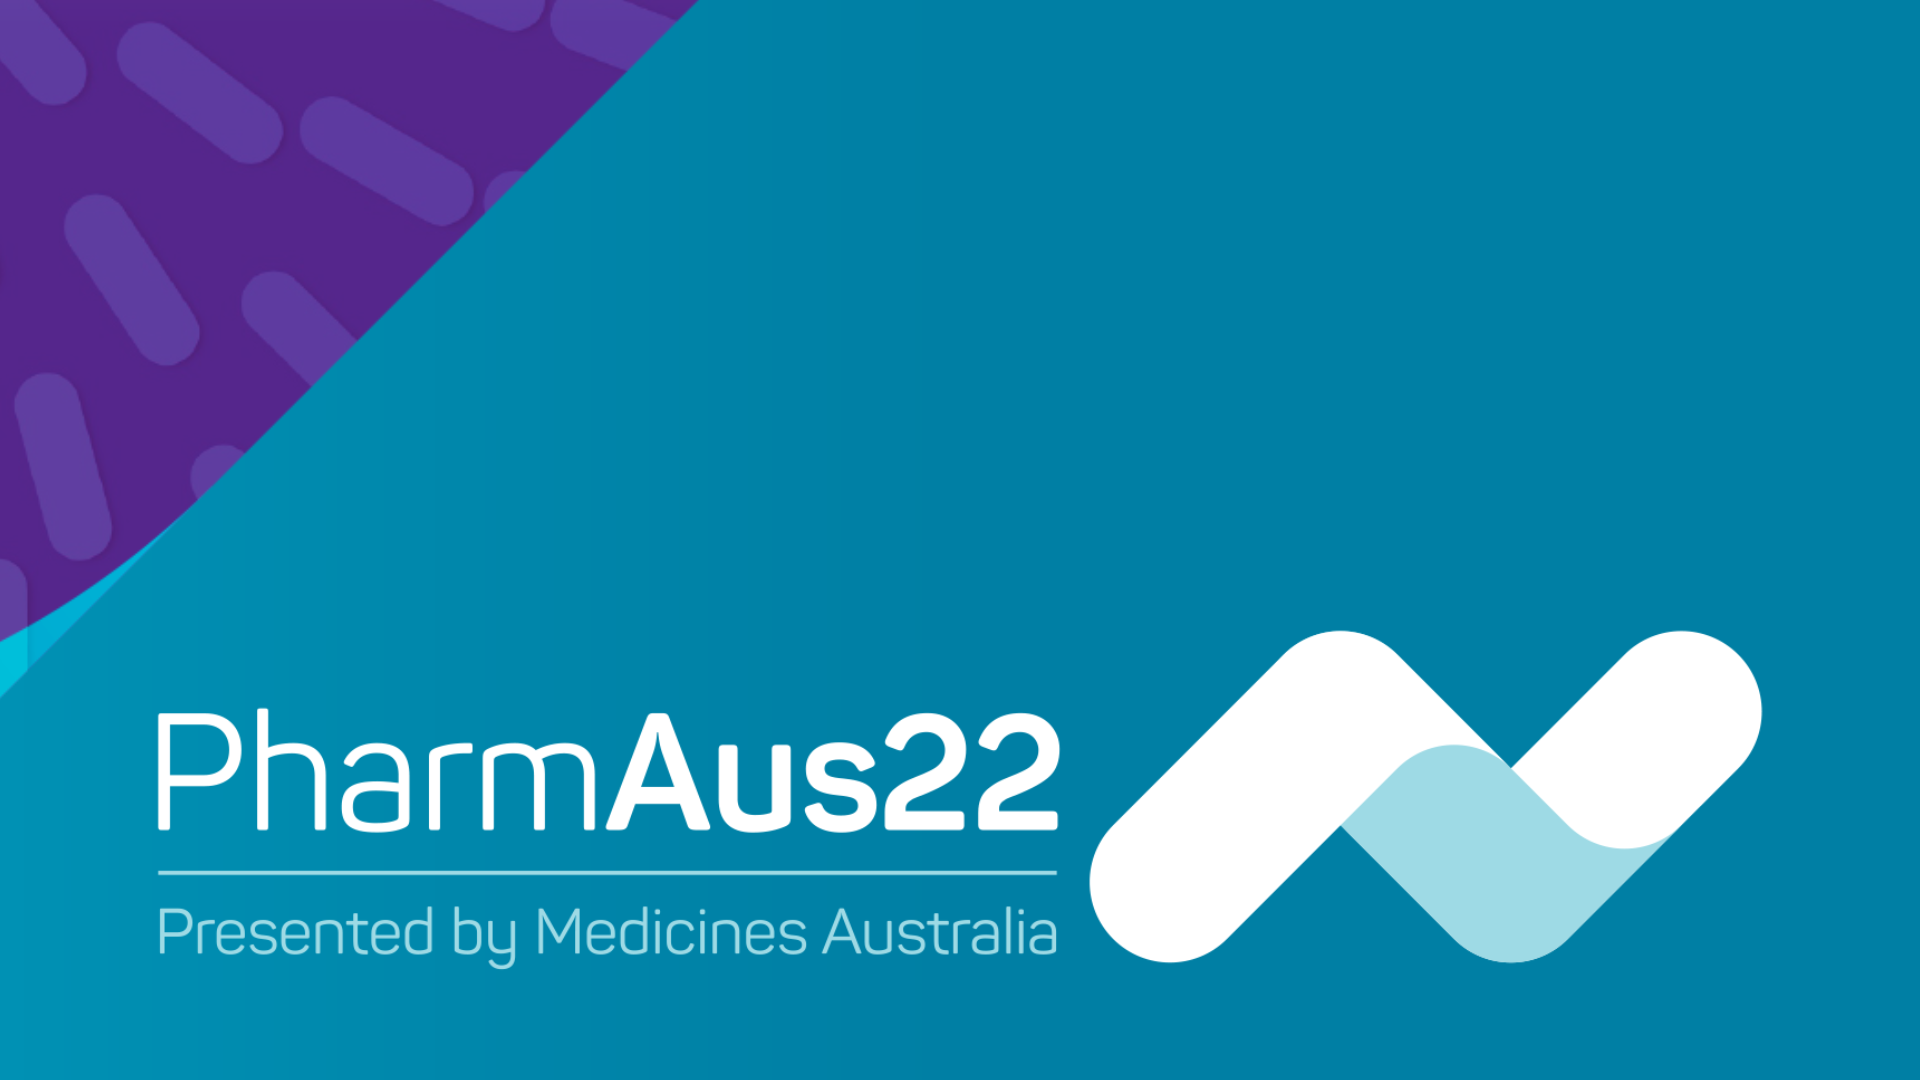 Parliament House event to shine a spotlight on the future of innovative medicines